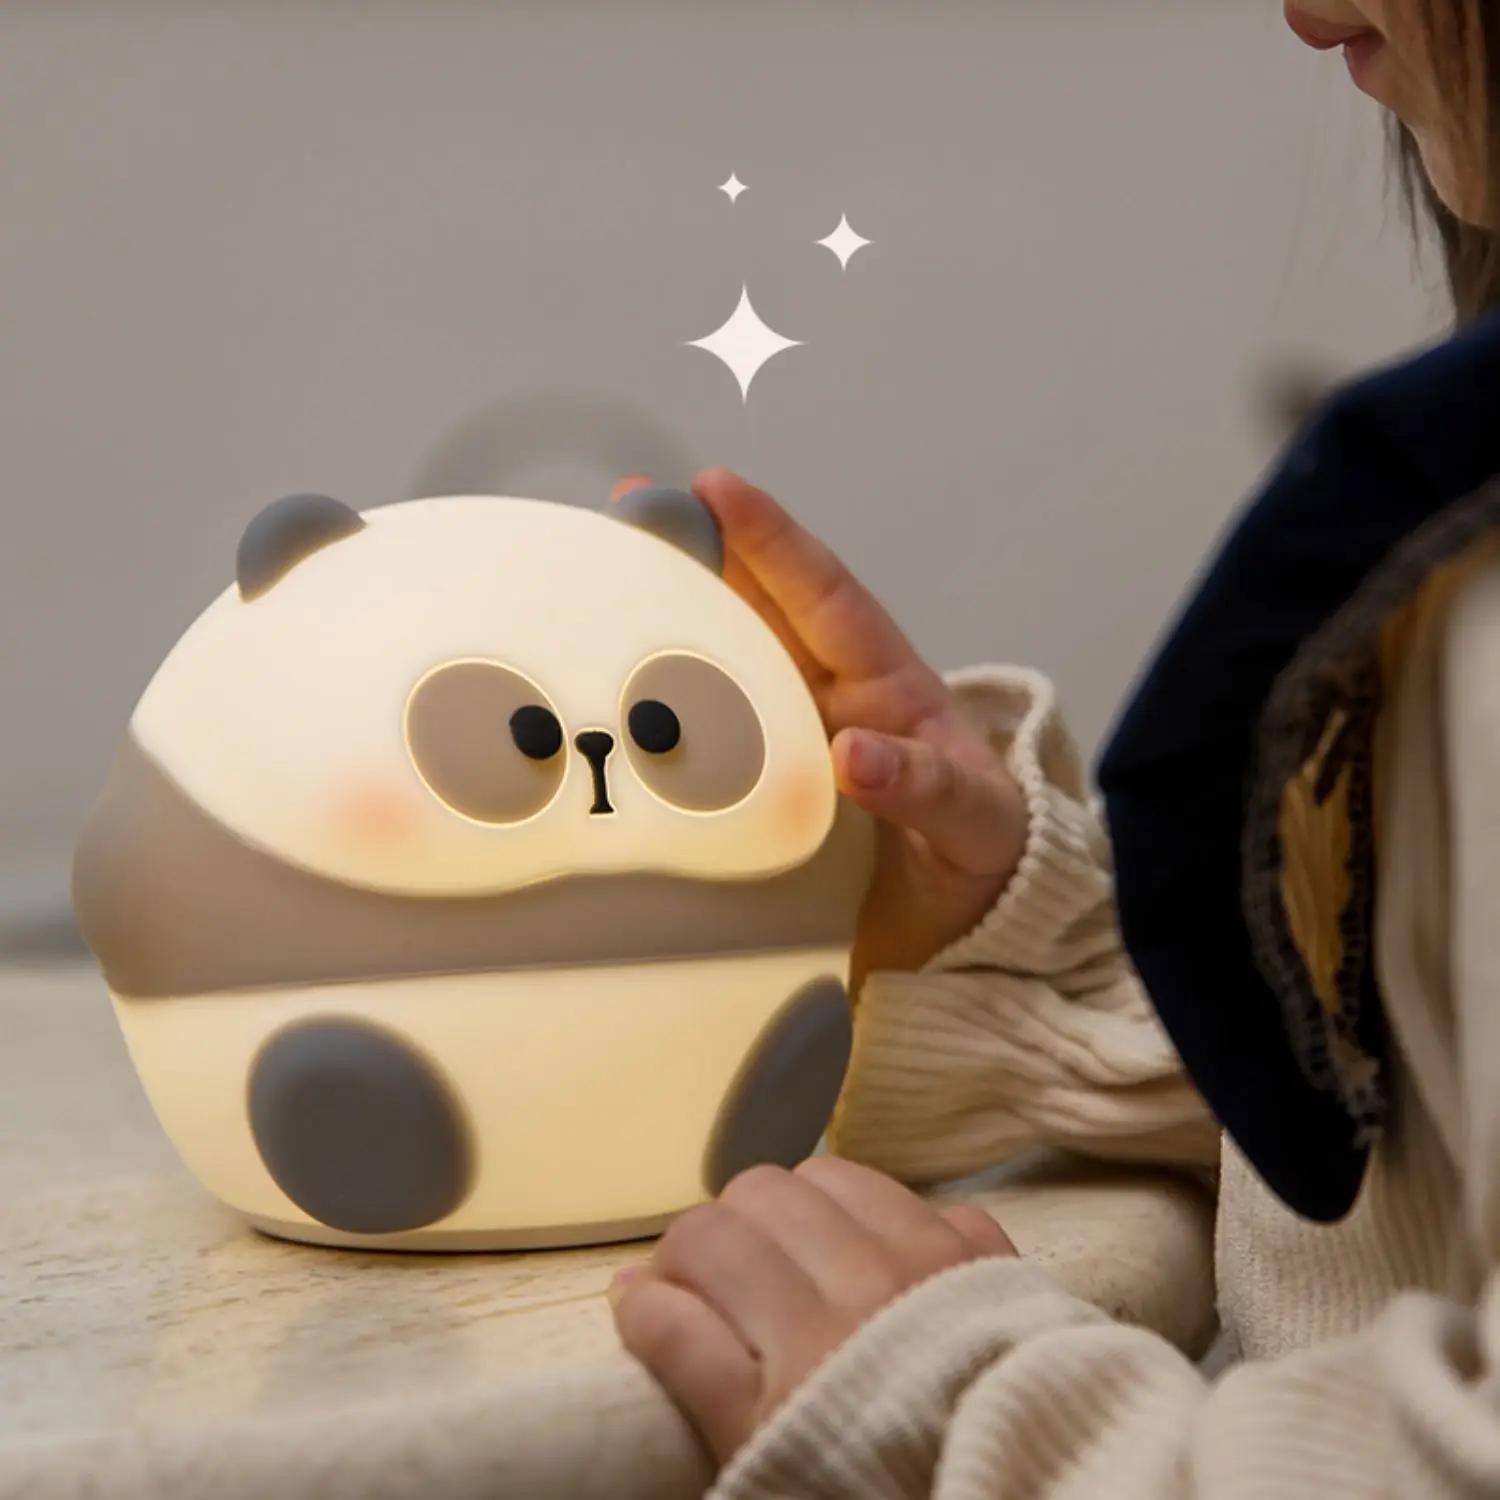 1pc LED Night Light, Cute Panda Cartoon Animals Silicone Lamp, USB Rechargeable Timing Sleeping Lamp, Creative Bedroom Bedside Lamp, For Home Decoration Festival/Birthday Gifts details 5